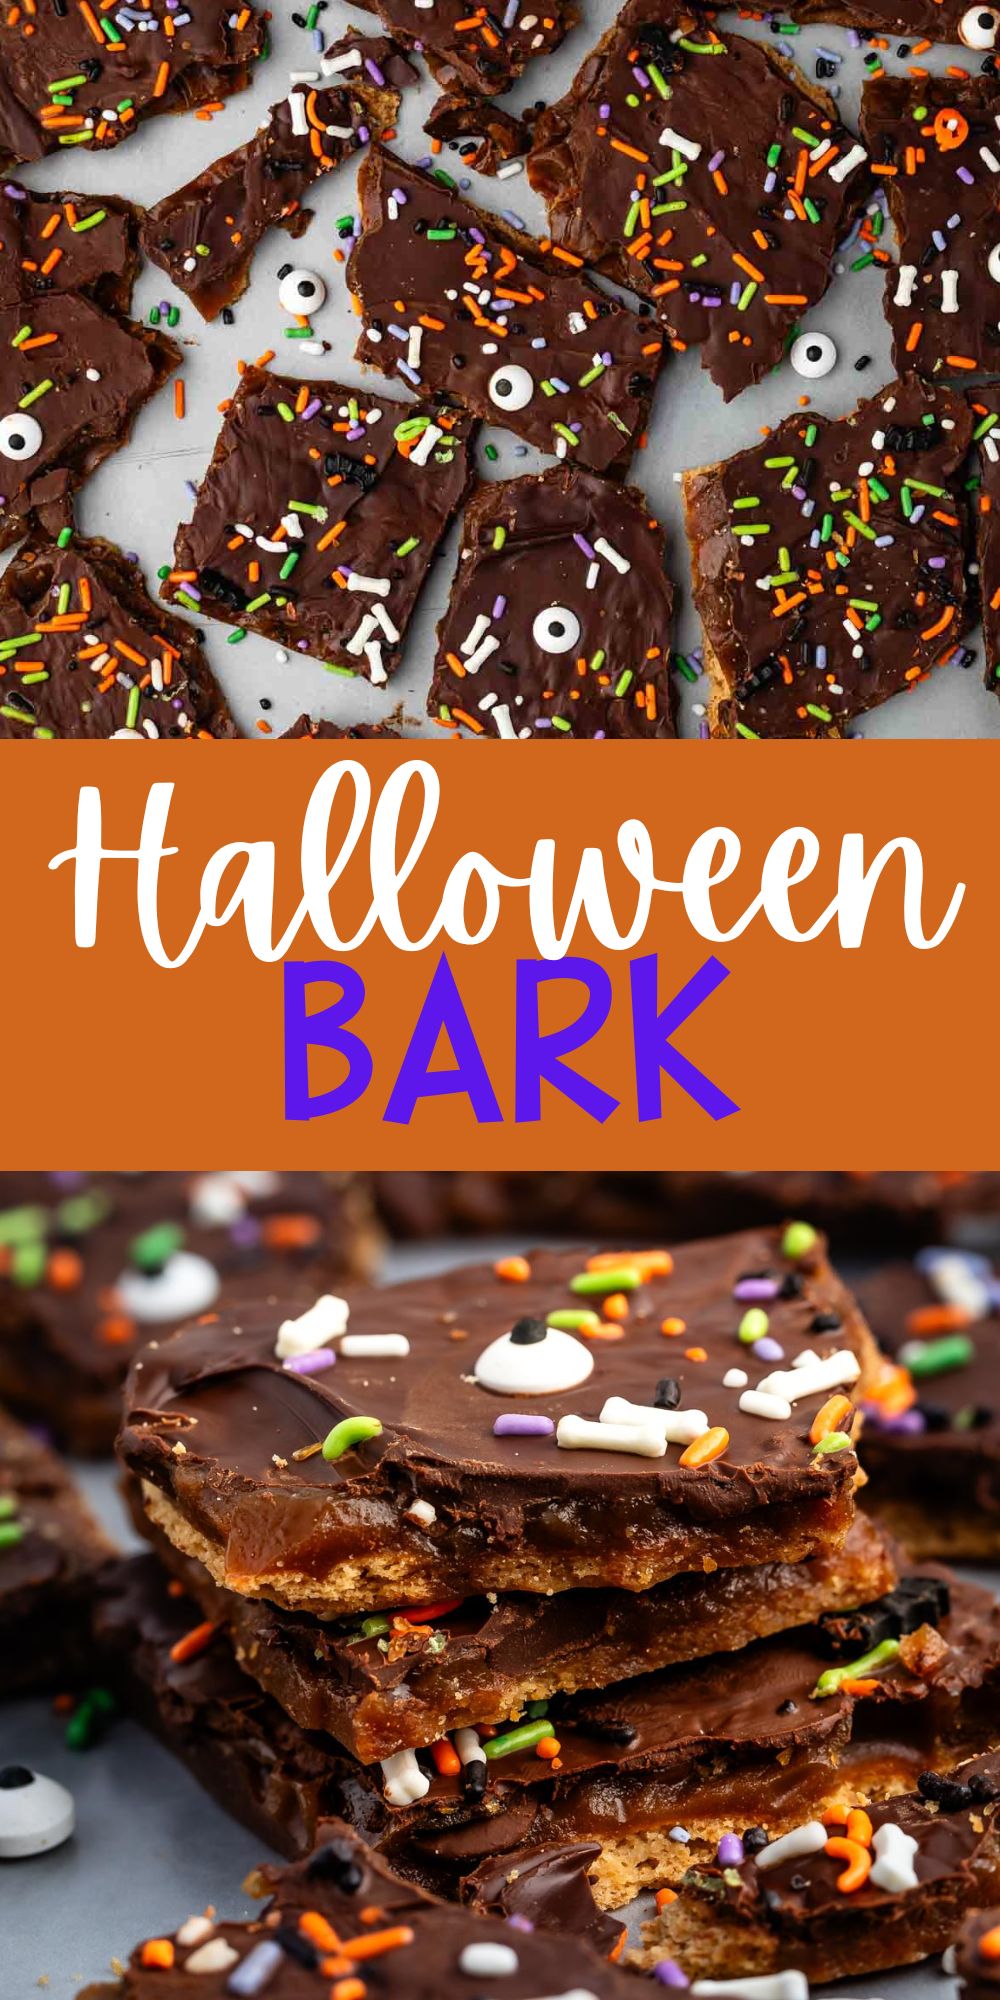 two photos of chocolate covered bark with sprinkles on top with words on the image.